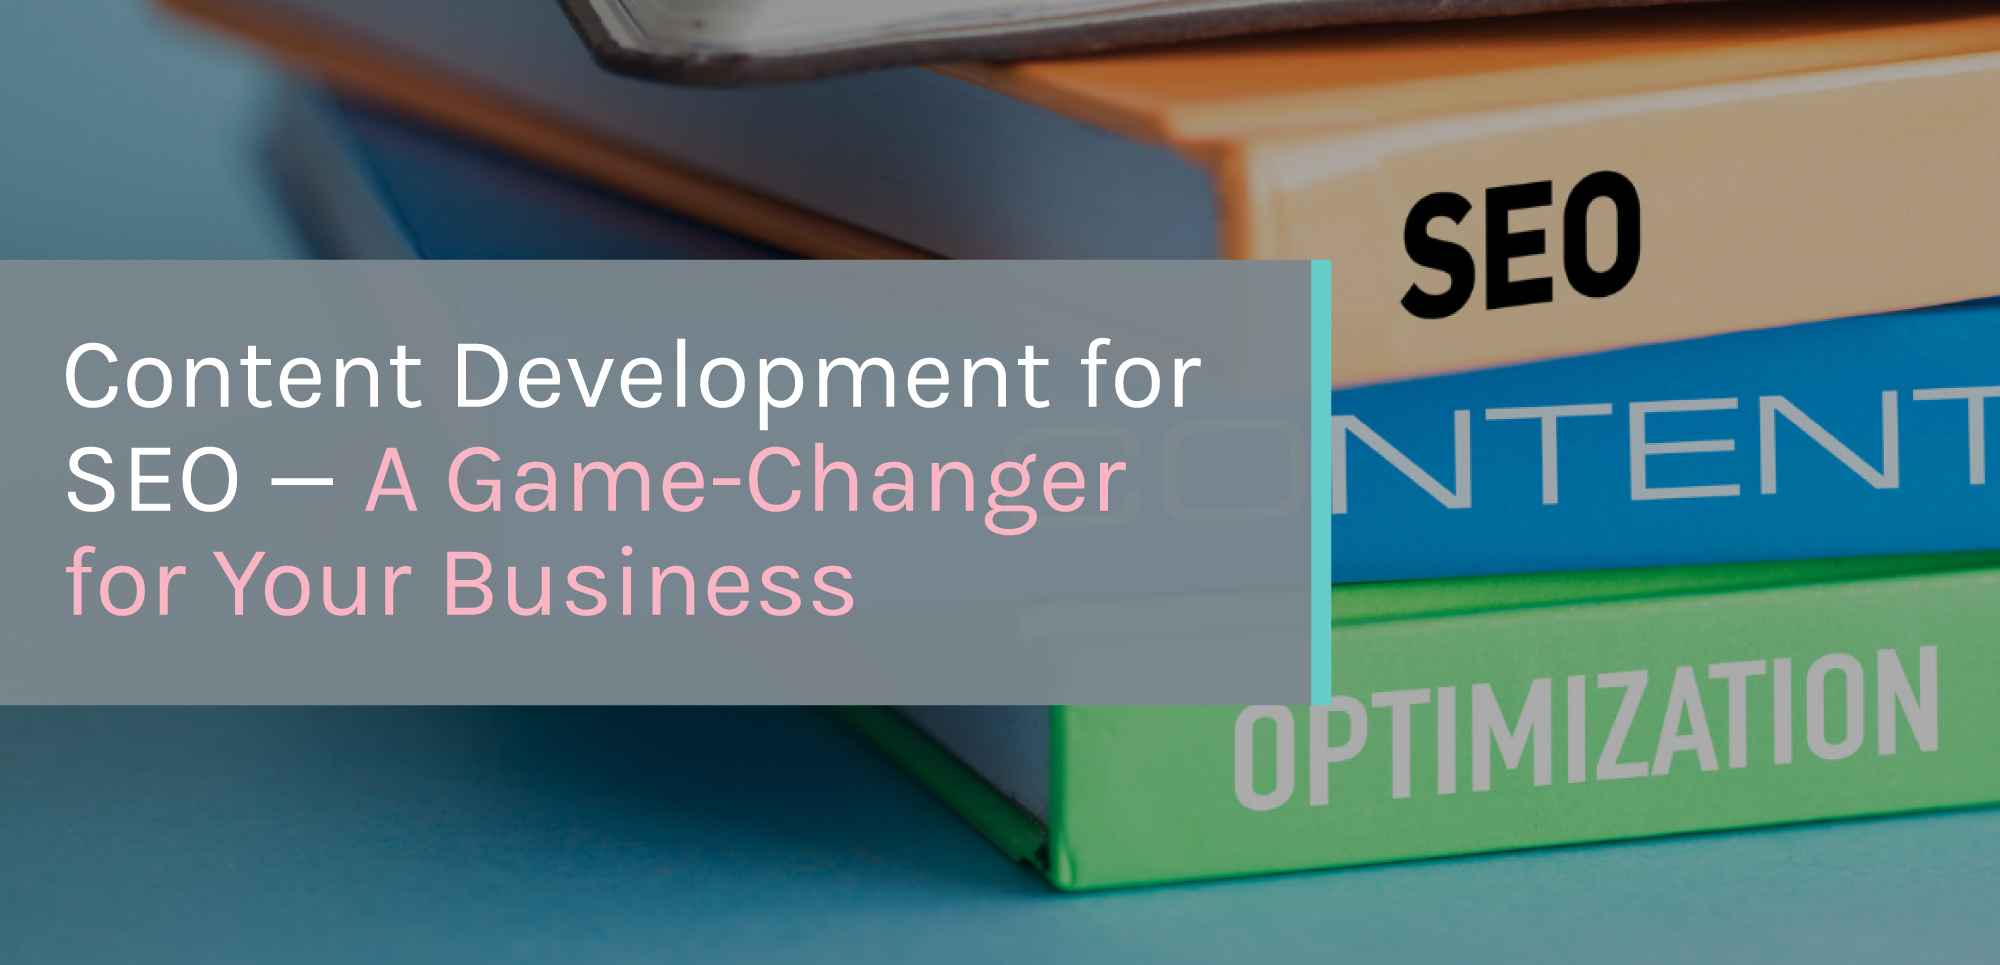 <strong>Content Development for SEO — A Game-Changer for Your Business</strong>